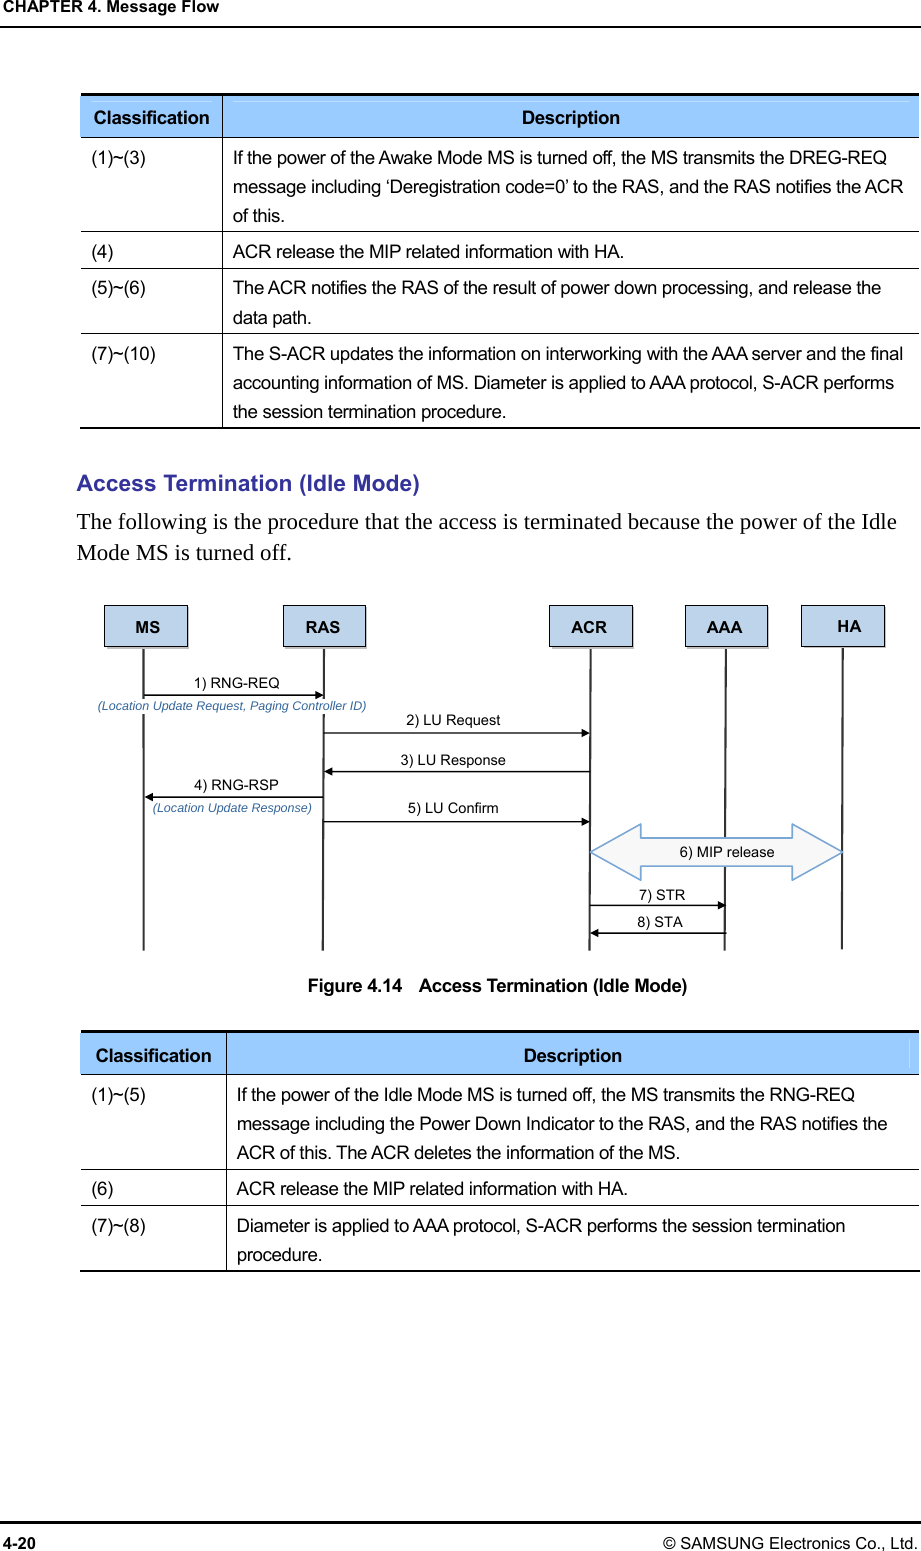 CHAPTER 4. Message Flow 4-20 © SAMSUNG Electronics Co., Ltd.  Classification  Description (1)~(3)  If the power of the Awake Mode MS is turned off, the MS transmits the DREG-REQ message including ‘Deregistration code=0’ to the RAS, and the RAS notifies the ACR of this. (4)  ACR release the MIP related information with HA. (5)~(6)  The ACR notifies the RAS of the result of power down processing, and release the data path. (7)~(10)  The S-ACR updates the information on interworking with the AAA server and the final accounting information of MS. Diameter is applied to AAA protocol, S-ACR performs the session termination procedure.  Access Termination (Idle Mode) The following is the procedure that the access is terminated because the power of the Idle Mode MS is turned off.    Figure 4.14    Access Termination (Idle Mode)  Classification  Description (1)~(5)  If the power of the Idle Mode MS is turned off, the MS transmits the RNG-REQ message including the Power Down Indicator to the RAS, and the RAS notifies the ACR of this. The ACR deletes the information of the MS. (6)  ACR release the MIP related information with HA. (7)~(8)  Diameter is applied to AAA protocol, S-ACR performs the session termination procedure.  MS RAS ACR1) RNG-REQ (Location Update Request, Paging Controller ID) 2) LU Request 4) RNG-RSP (Location Update Response) 3) LU Response 5) LU Confirm AAA 7) STR 8) STA HA 6) MIP release 